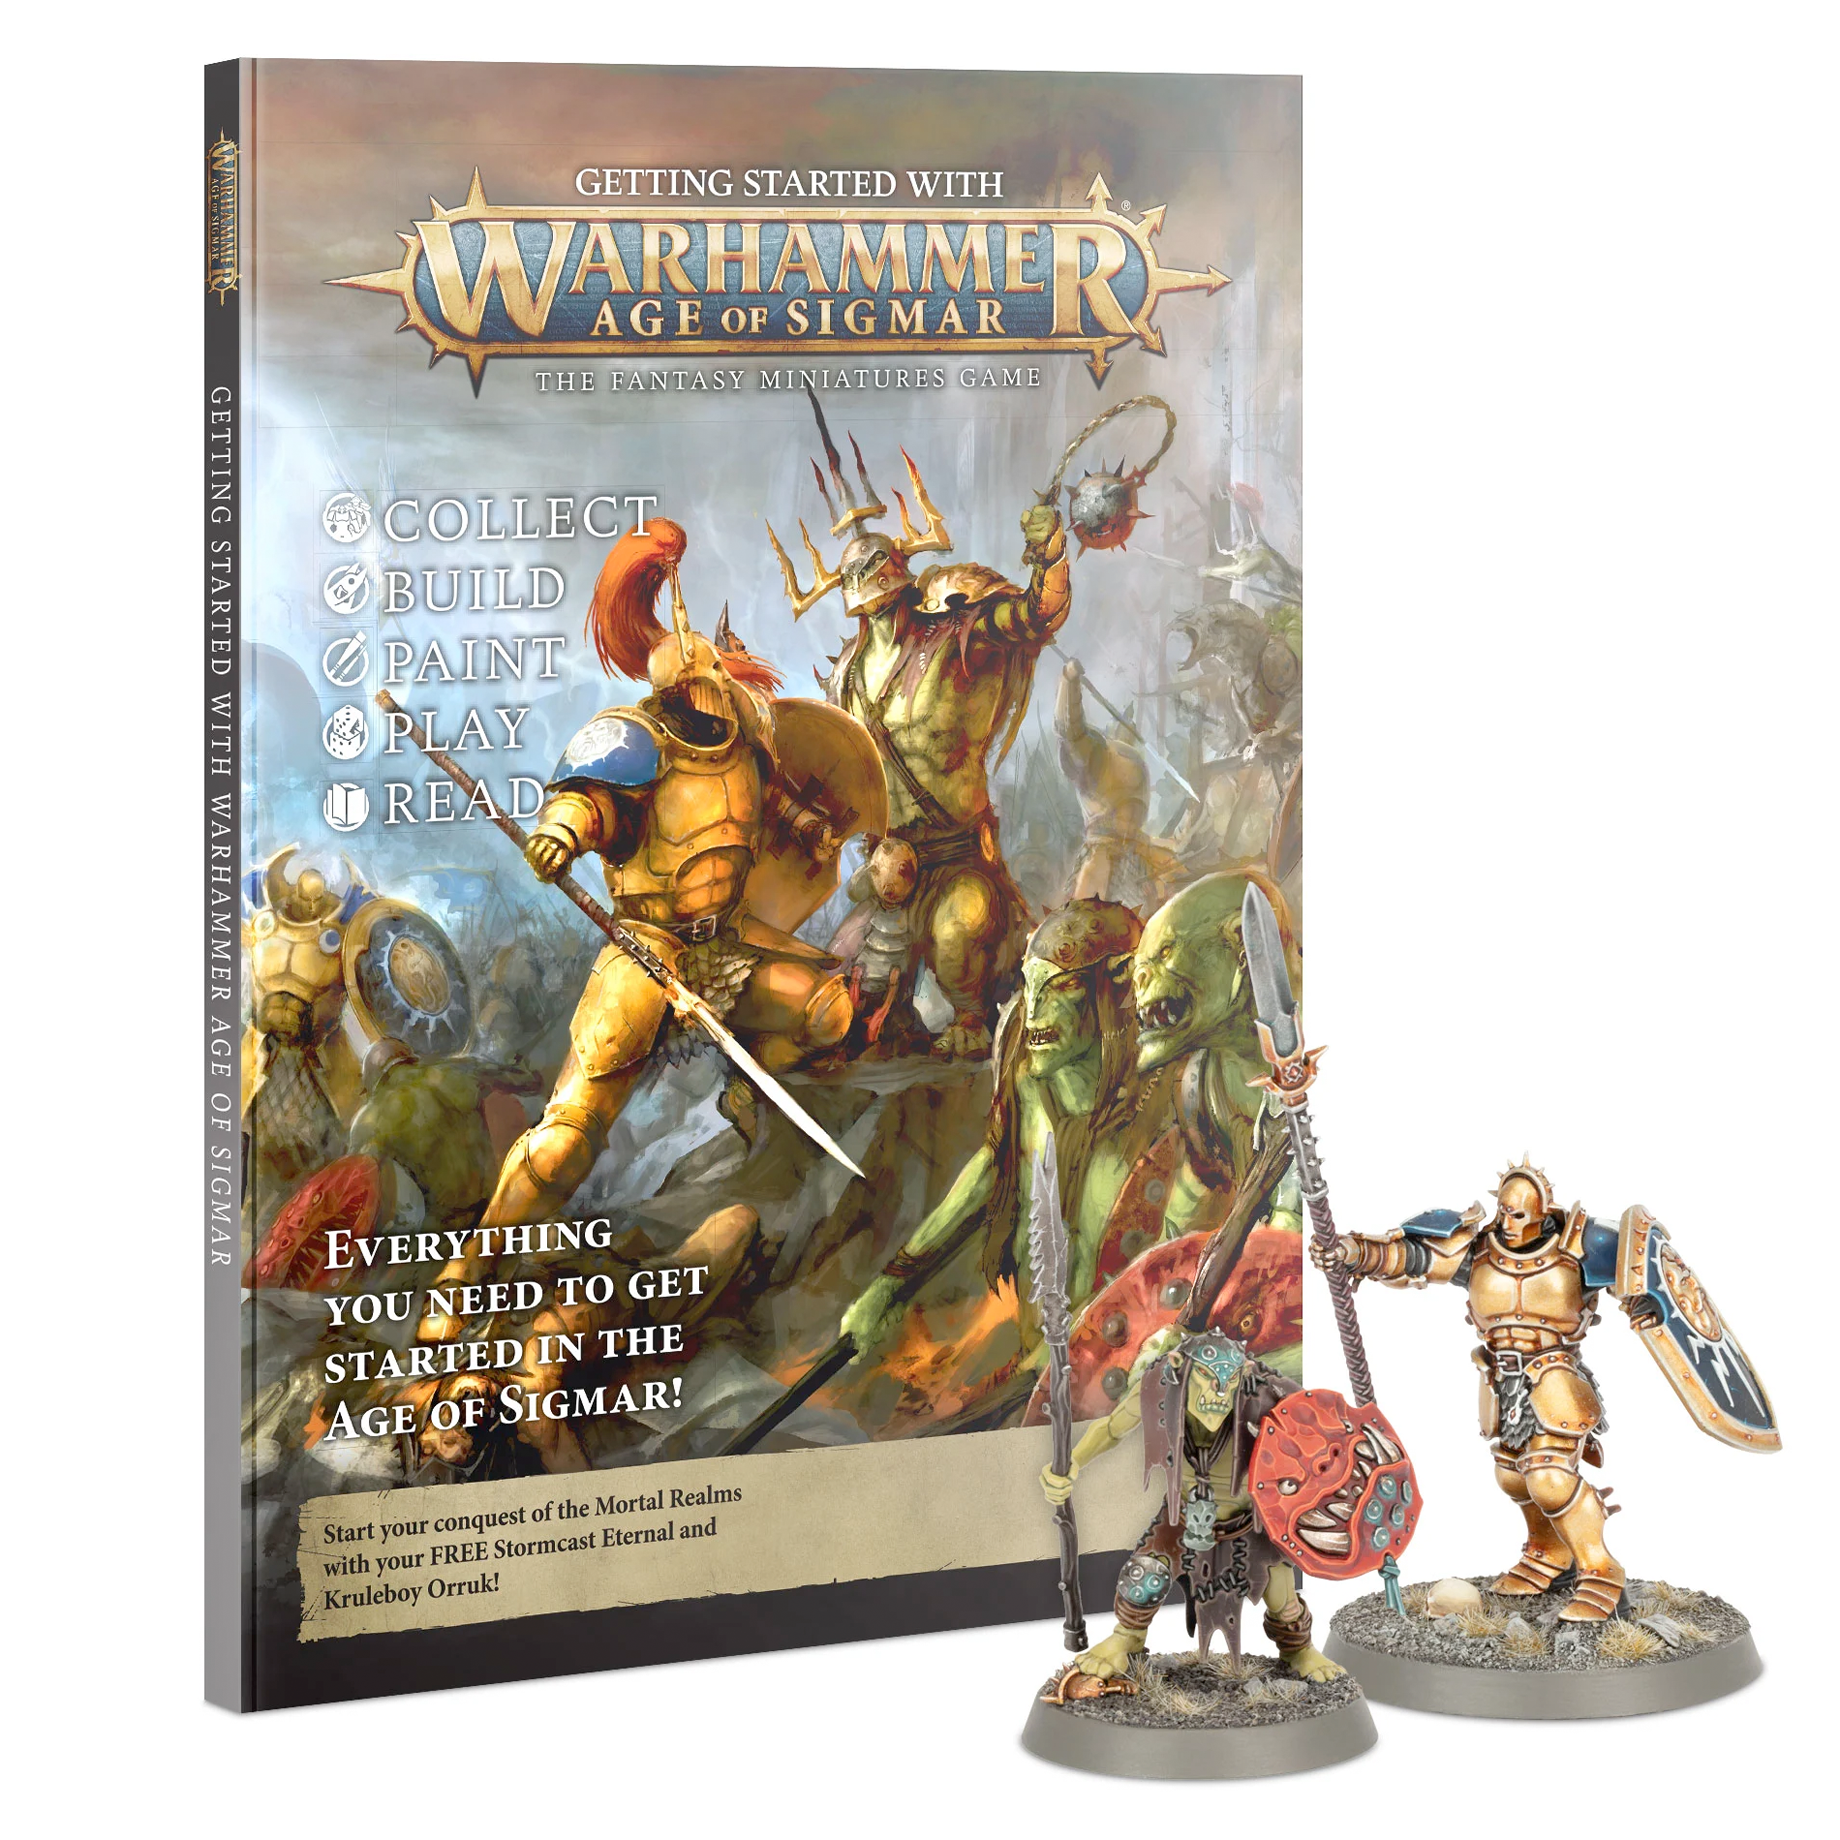 Getting Started With Warhammer Age of Sigmar 3E*